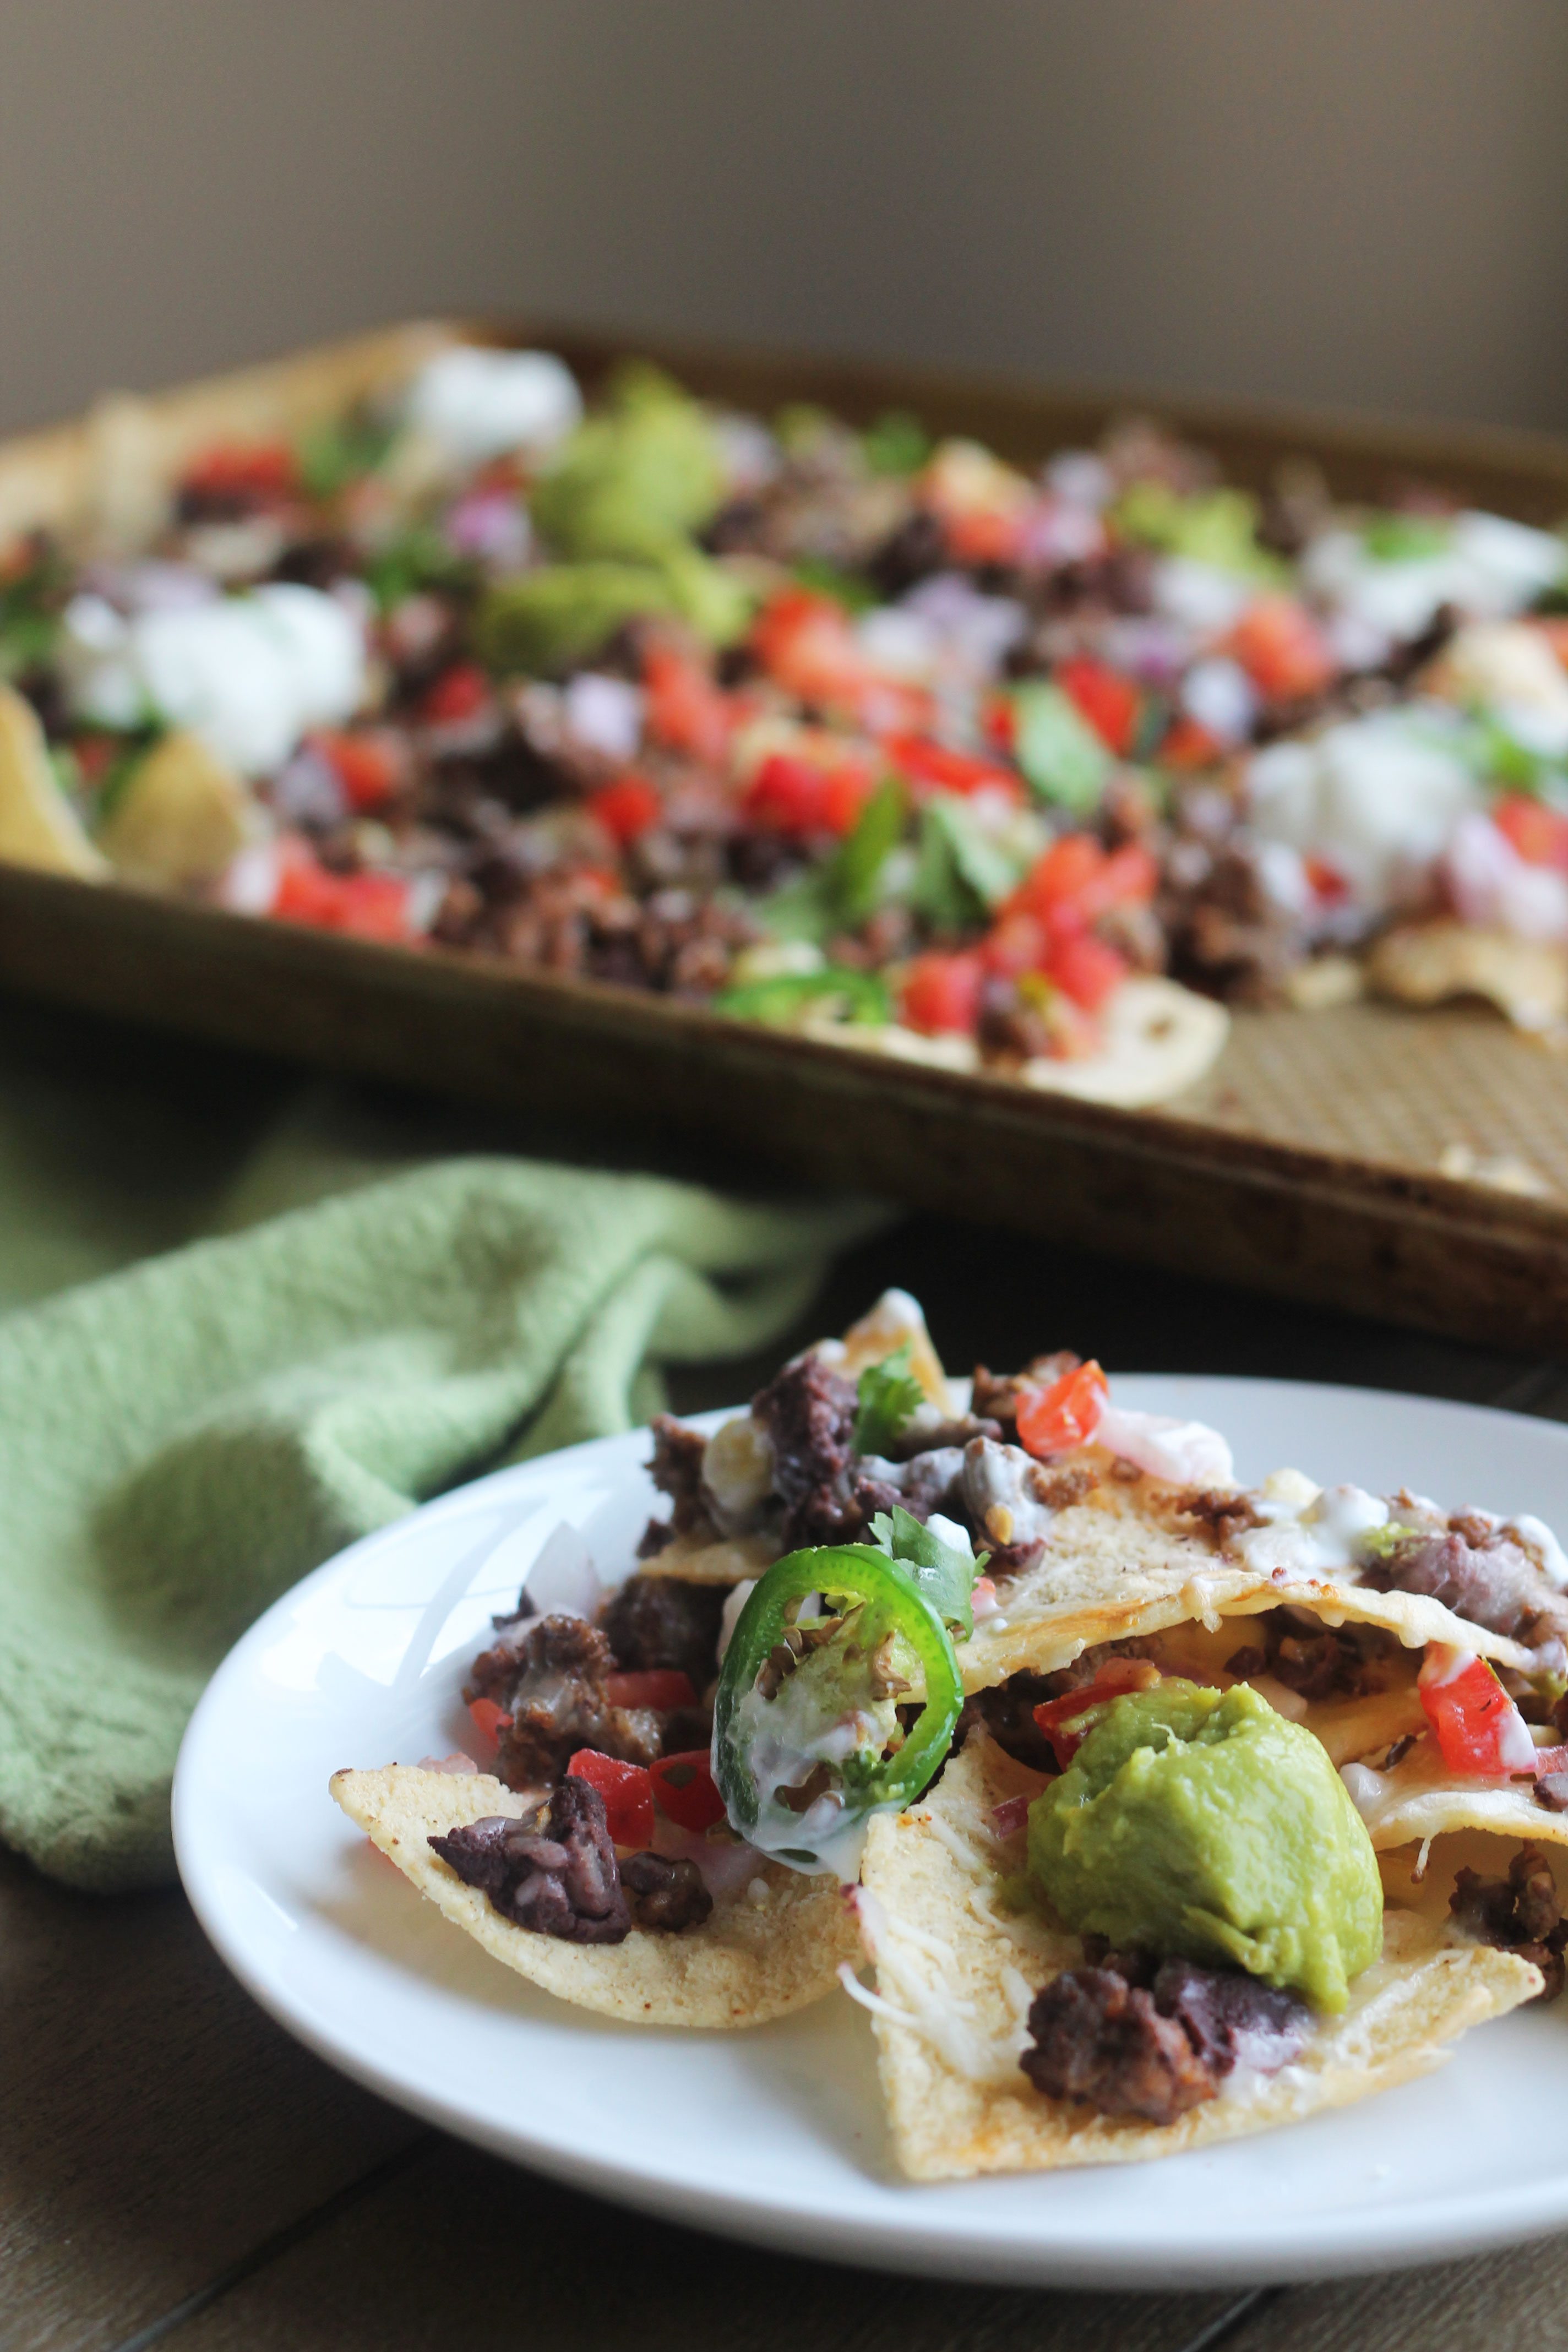 Need a crowd pleasing dish? Then look no further than these Sheet Pan Beef Nachos